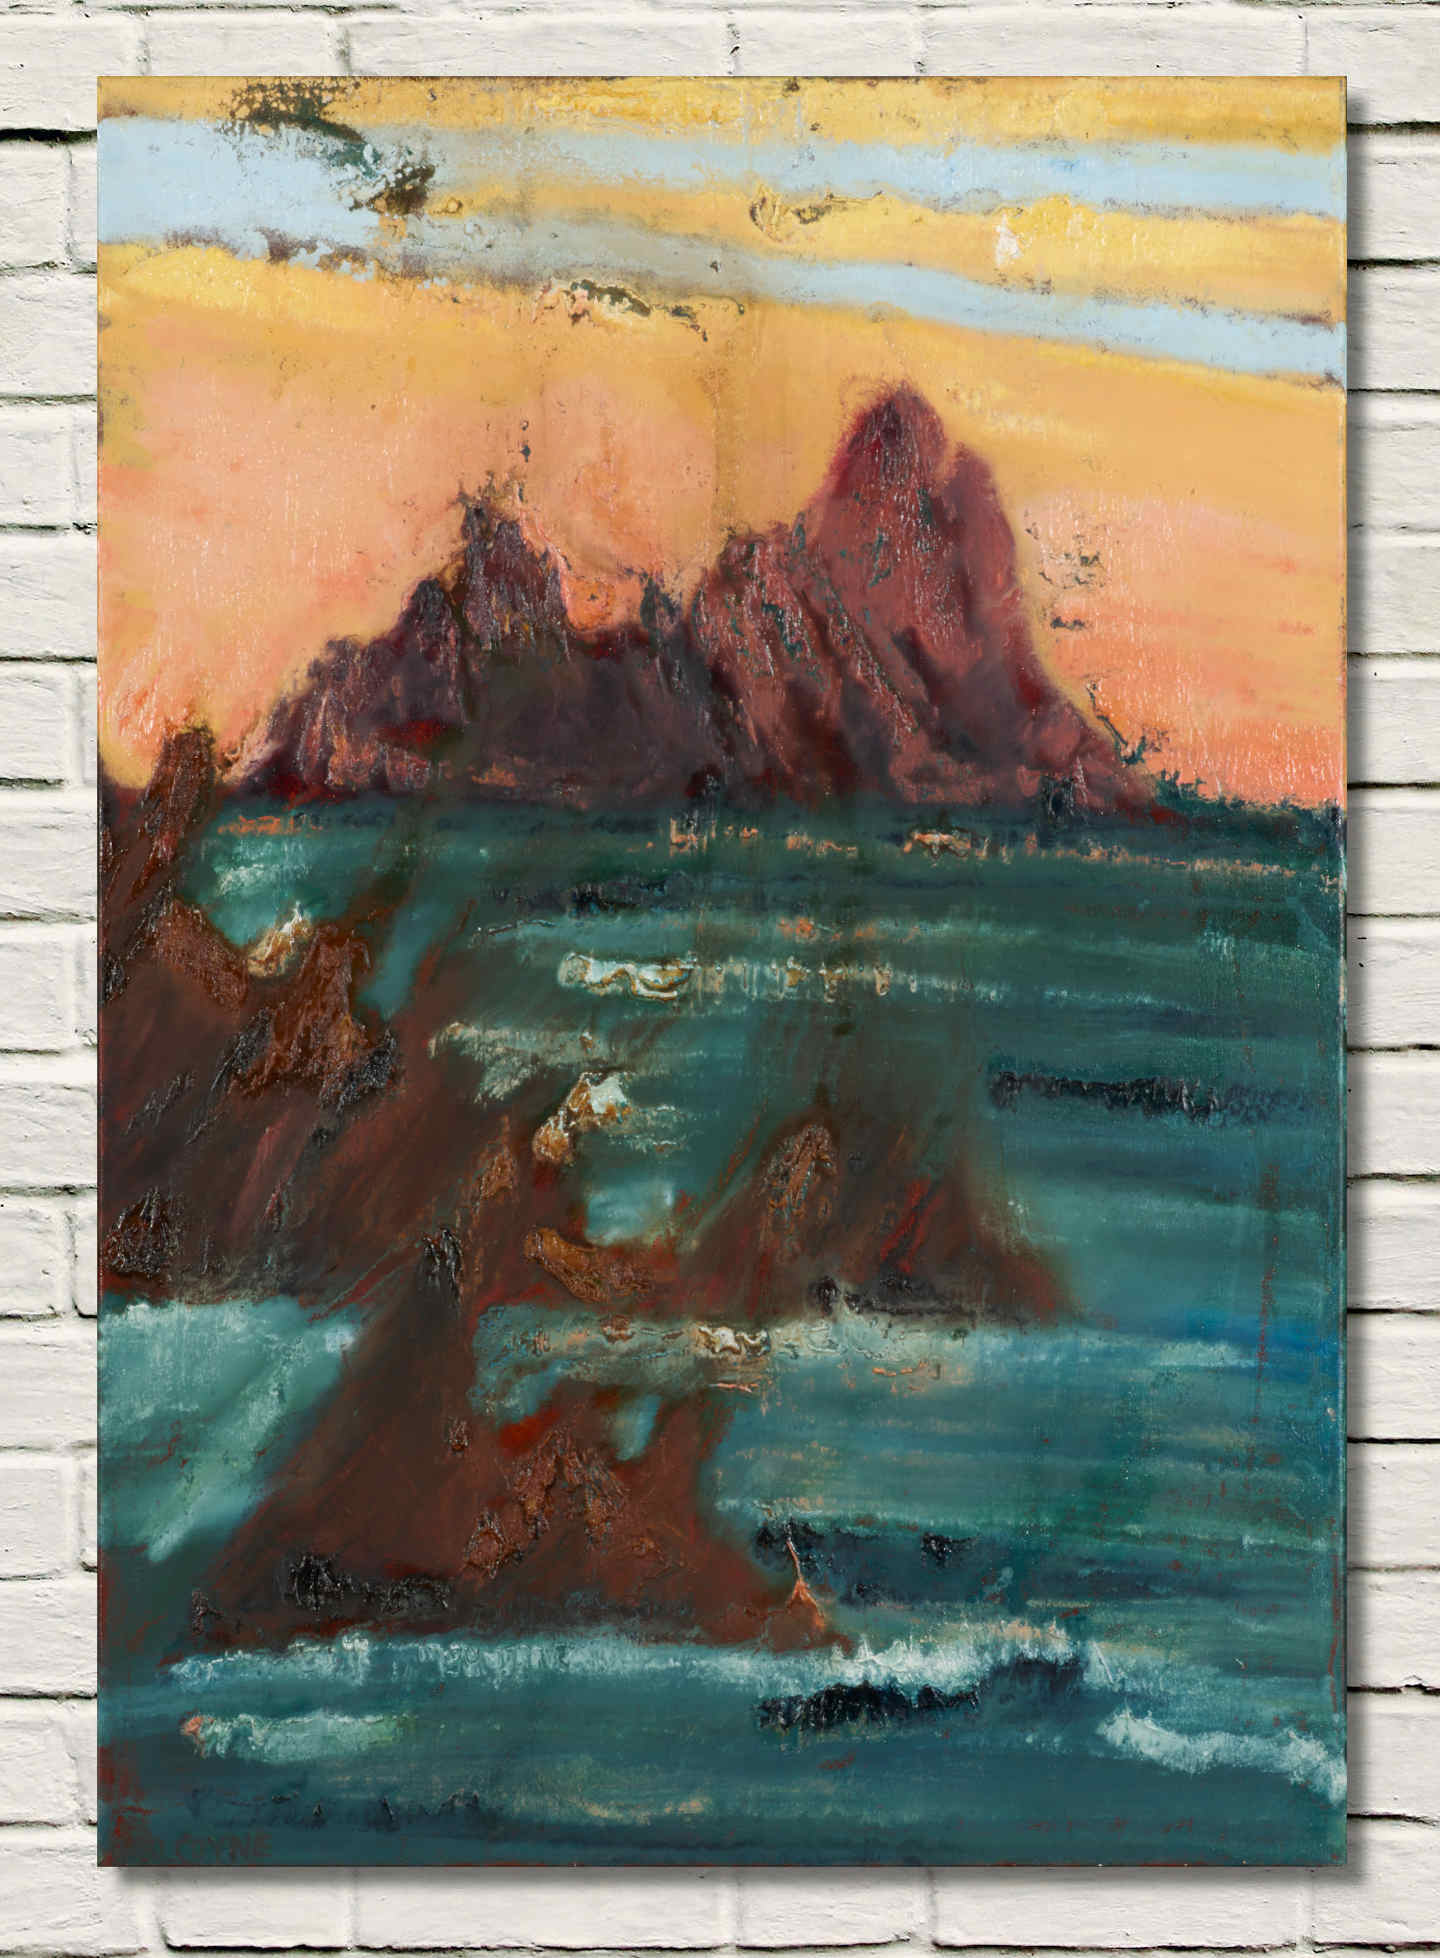 artist Rod Coyne's painting "skellig blush" is shown here on a white wall.